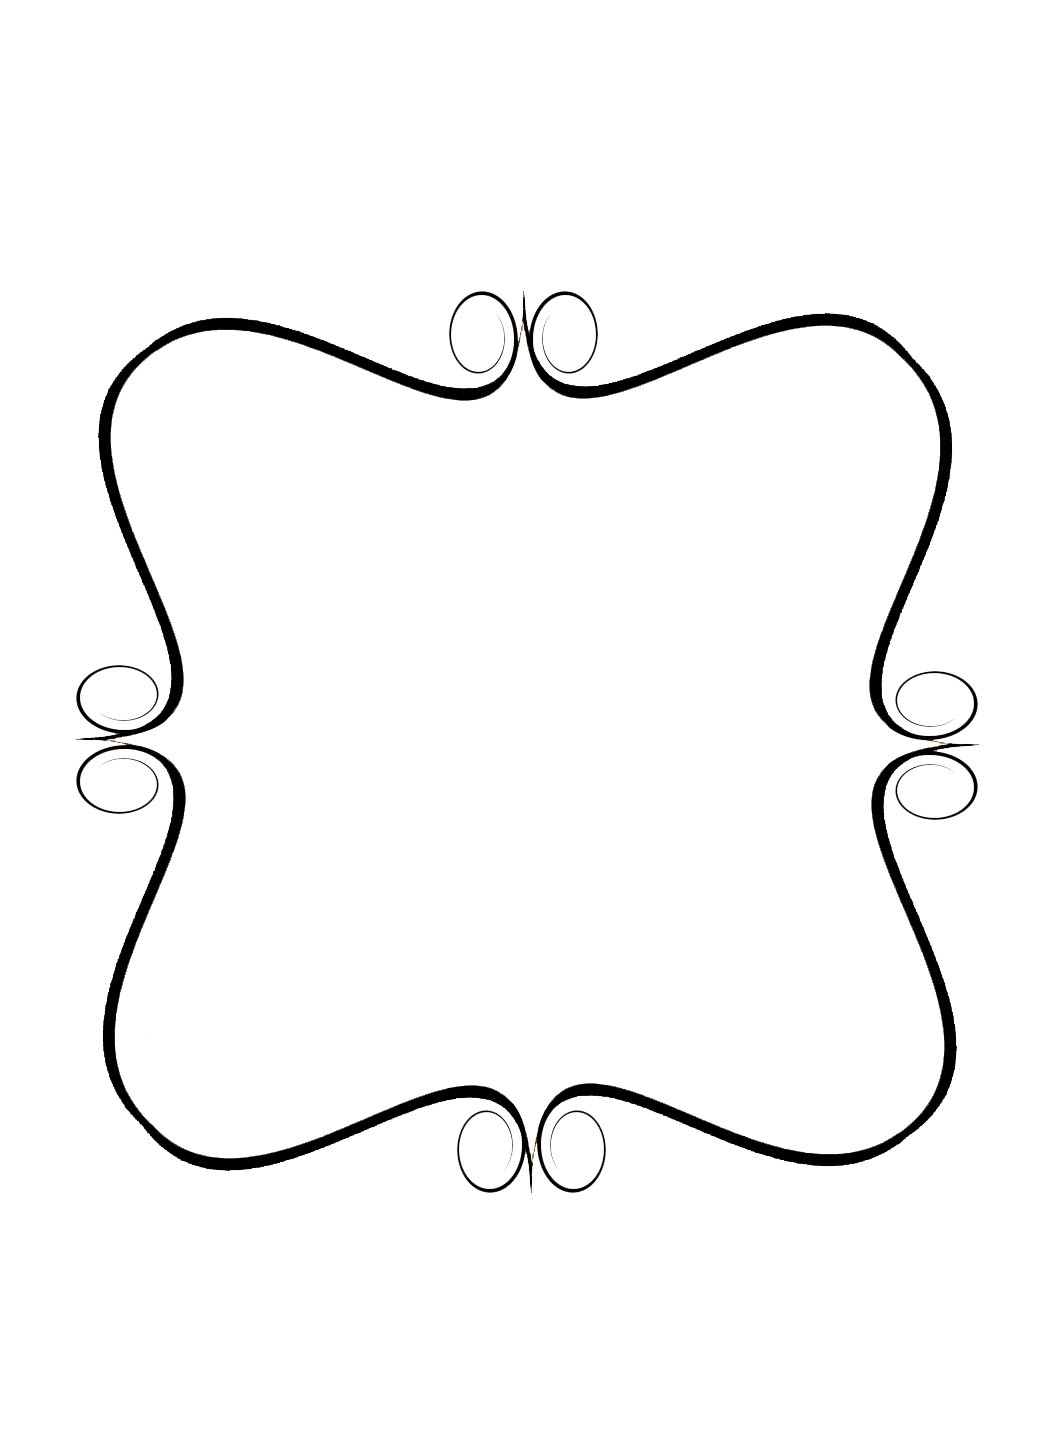 Images For > Simple Swirls Border